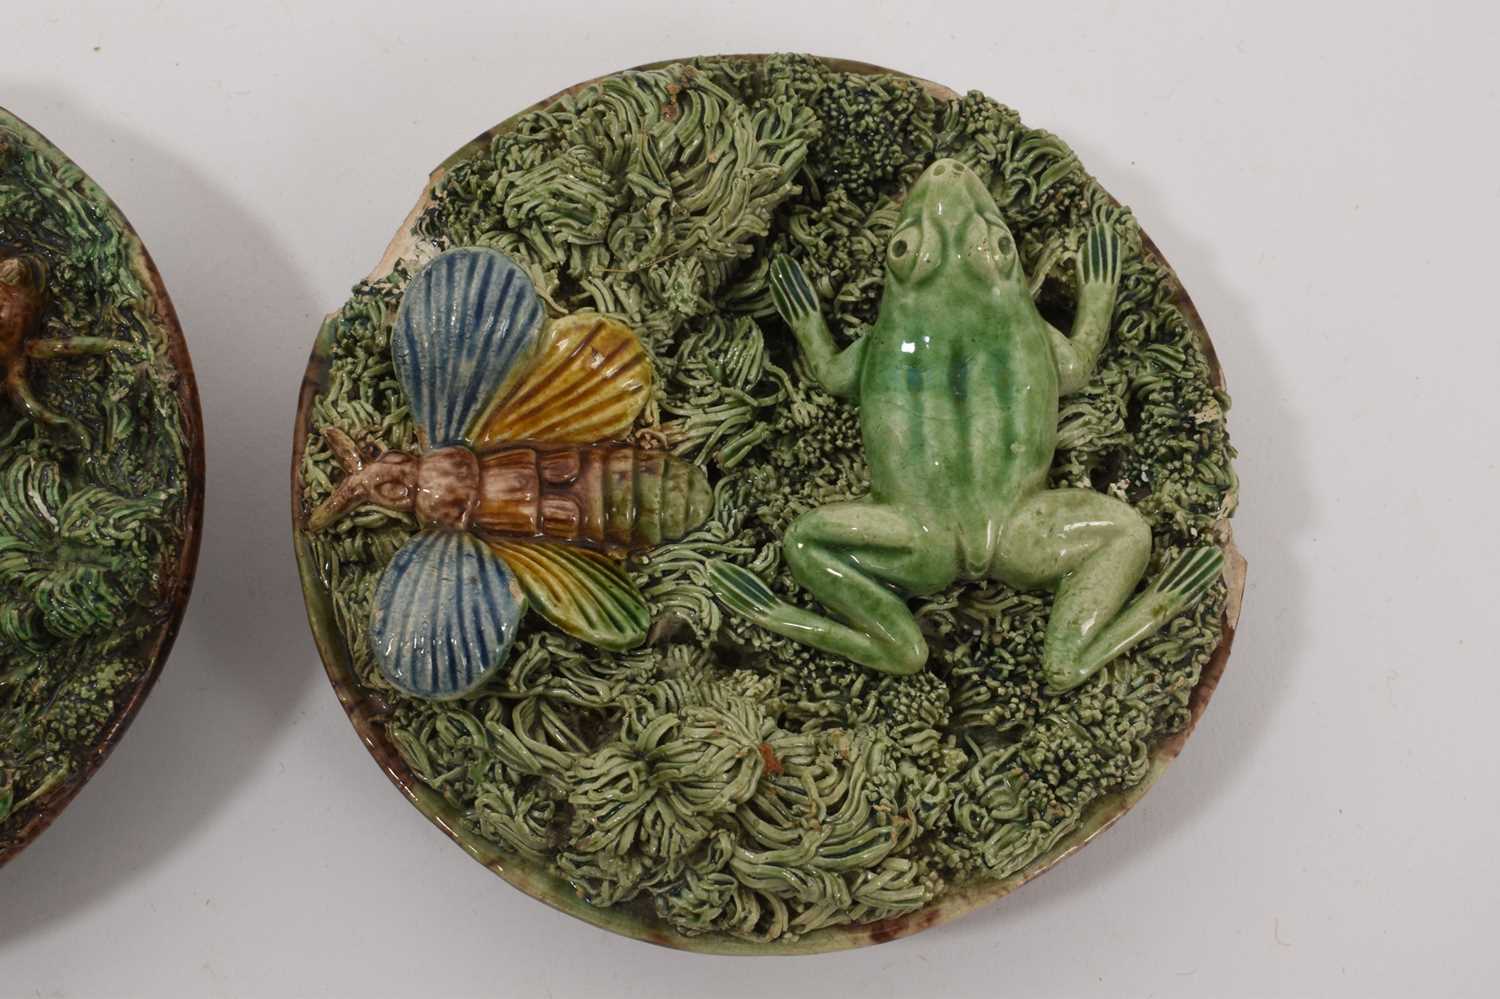 Two small antique Palissy ware majolica pottery plates - M Mafra, Portugal (2) - Image 2 of 5